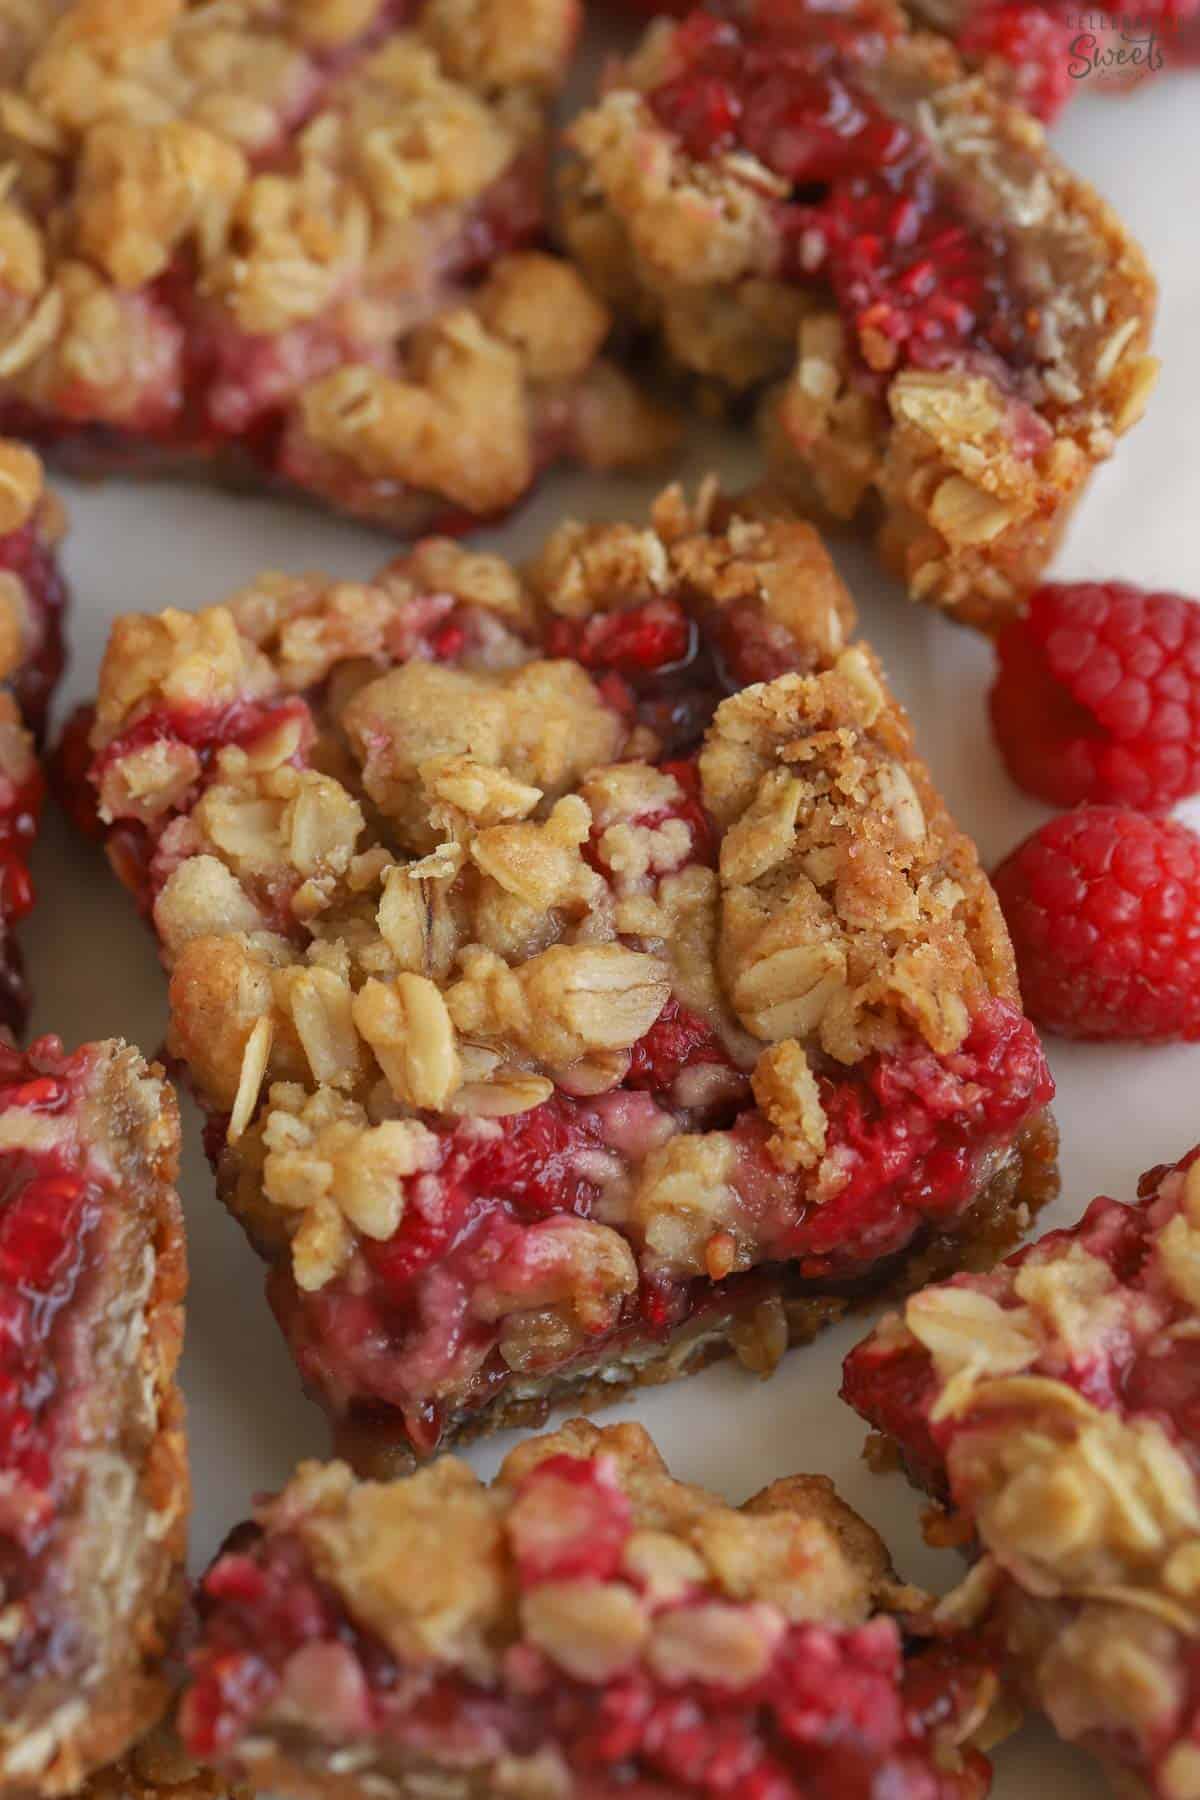 Closeup of a raspberry bar on parchment paper.